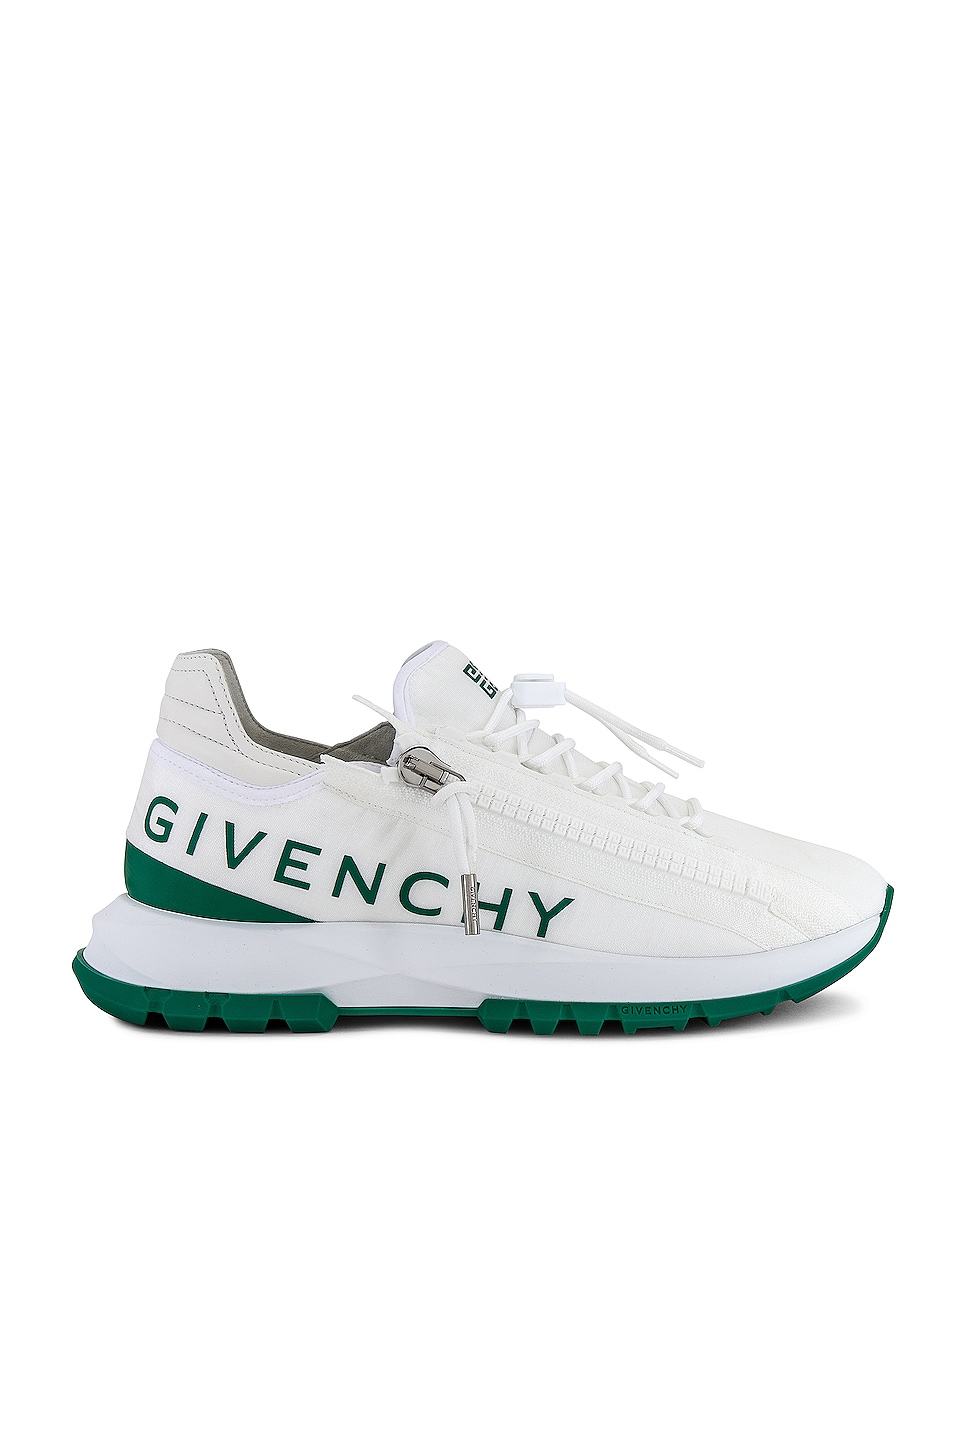 Image 1 of Givenchy Spectre Zip Runners Sneaker in White & Green